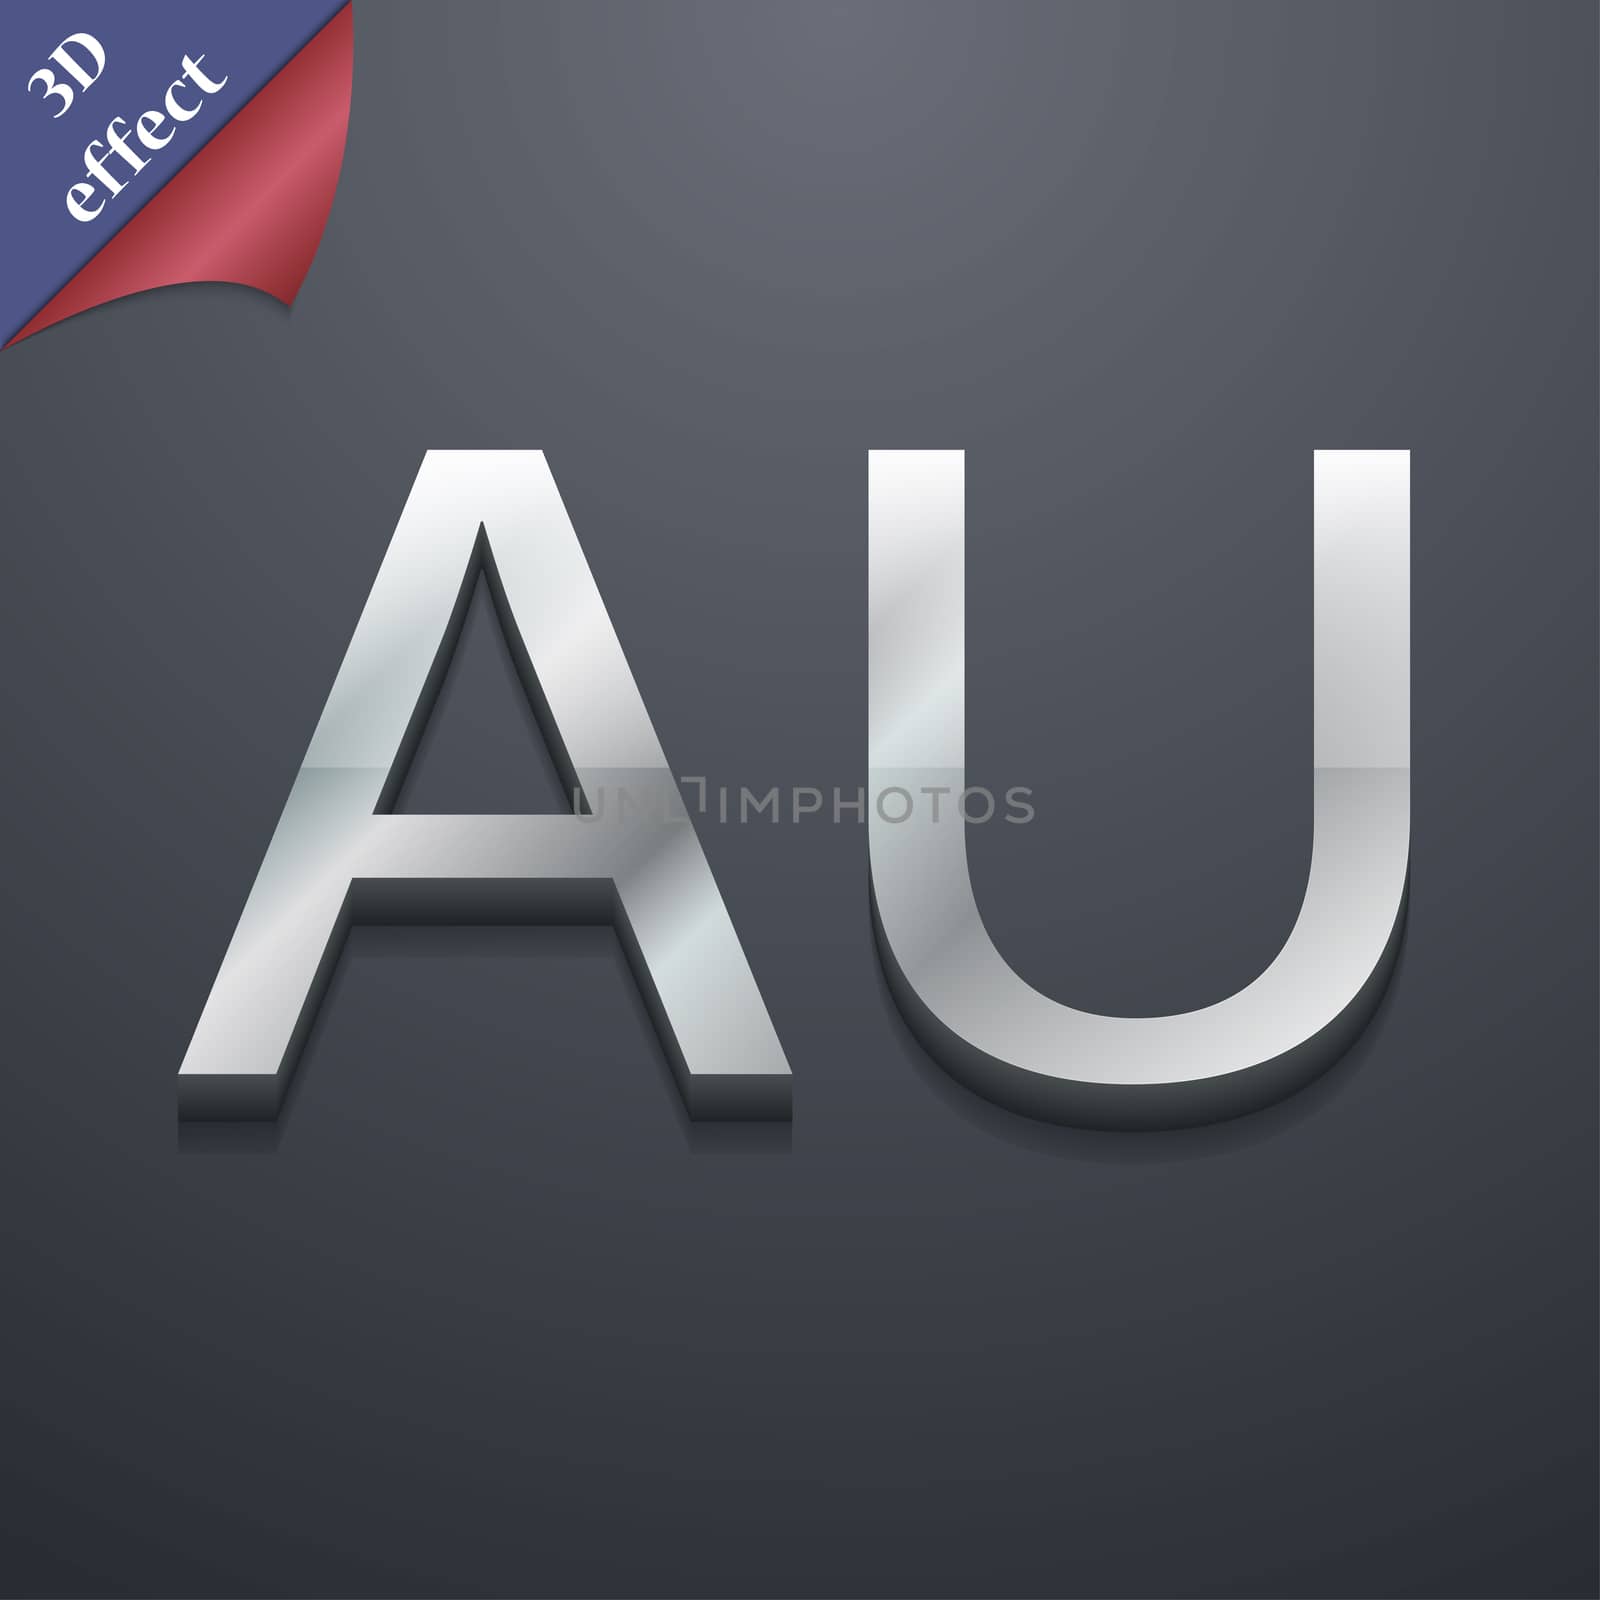 australia icon symbol. 3D style. Trendy, modern design with space for your text illustration. Rastrized copy